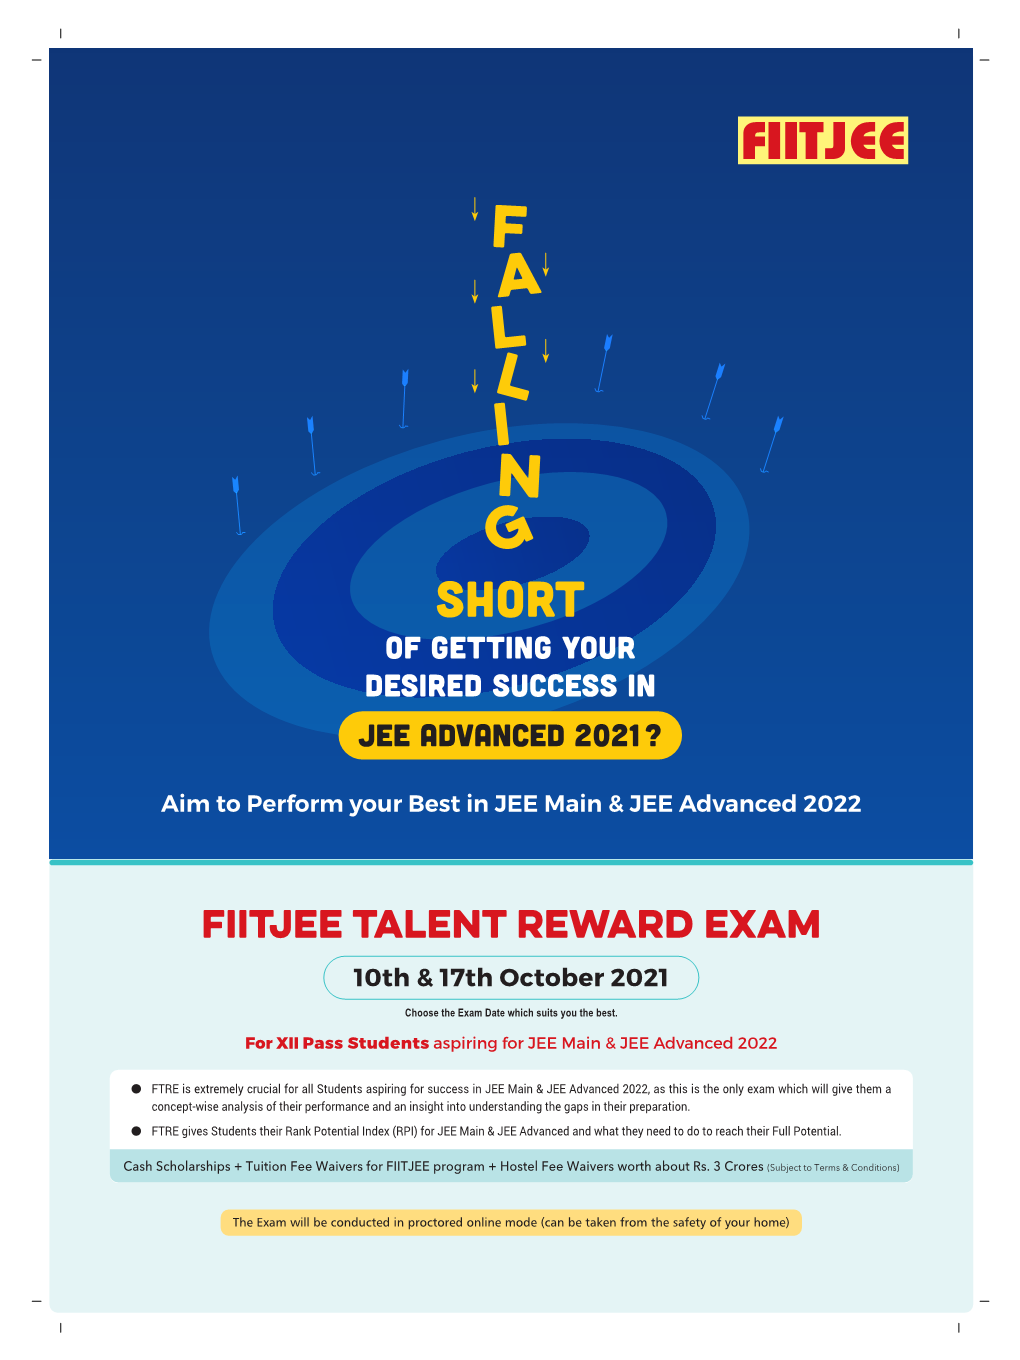 F a L L I N G Short of GETTING YOUR DESIRED SUCCESS in JEE ADVANCED 2021?